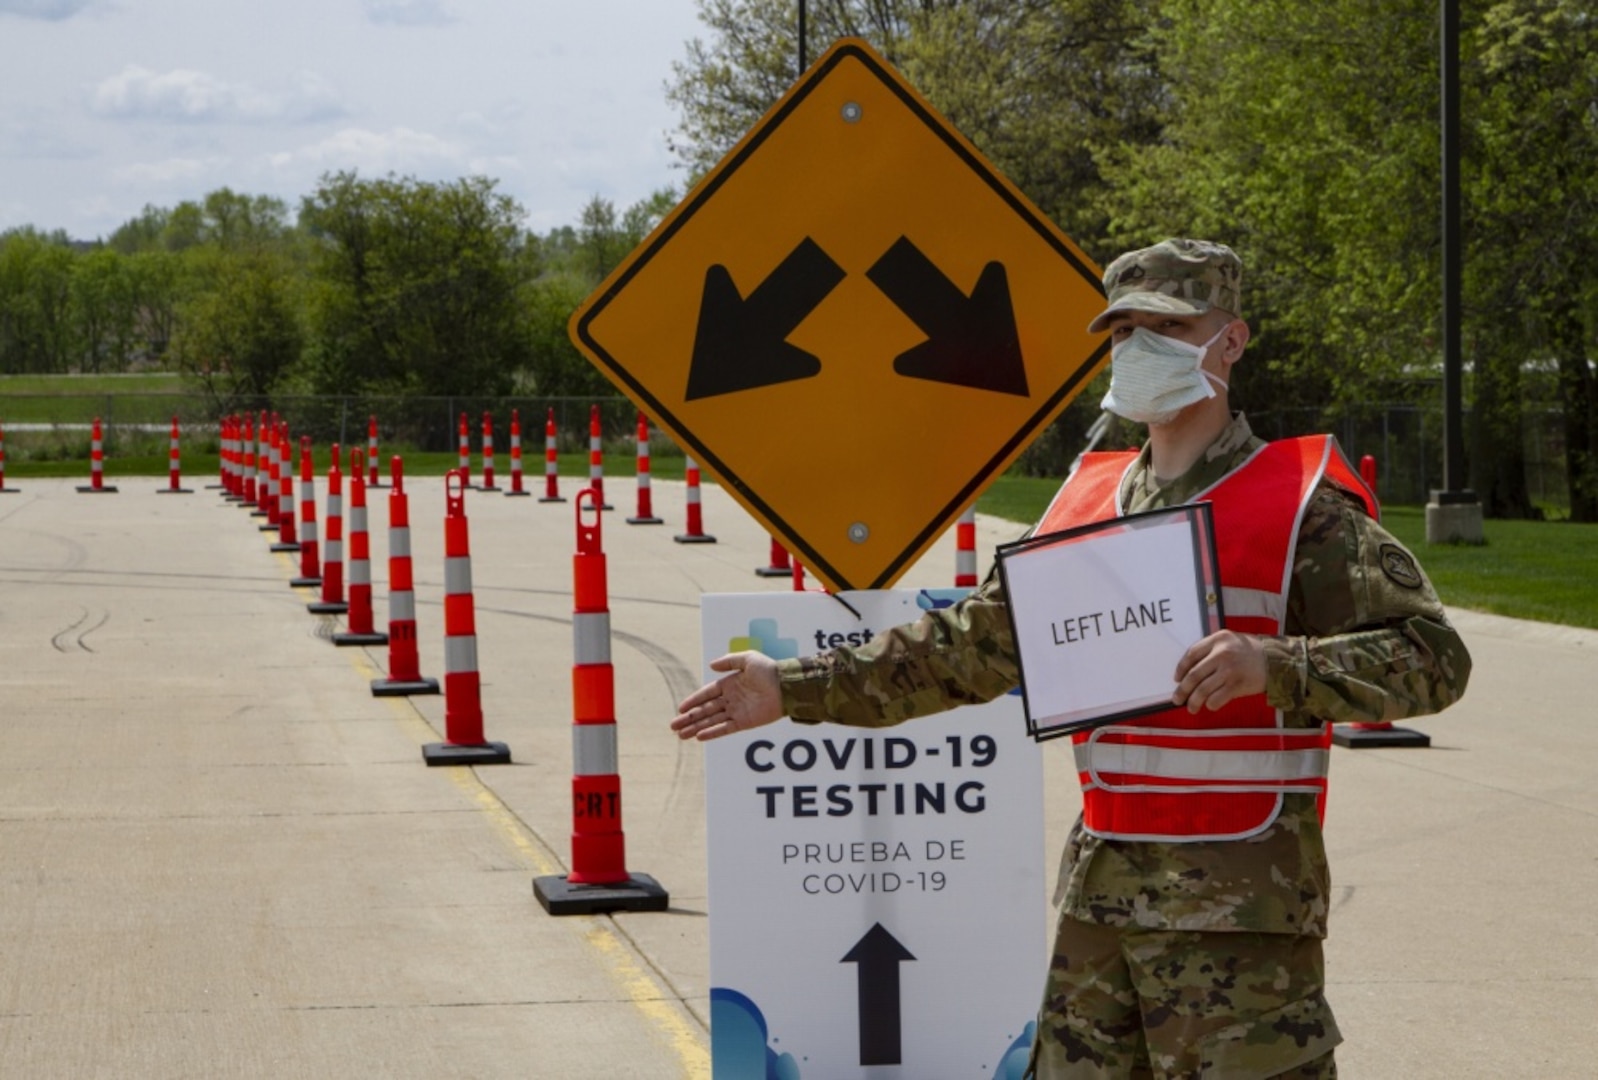 An Army PFC wearing a uniform, reflective vest and mask directs traffic with his arm extended in front of a directional sign for COVID-19 testing site.